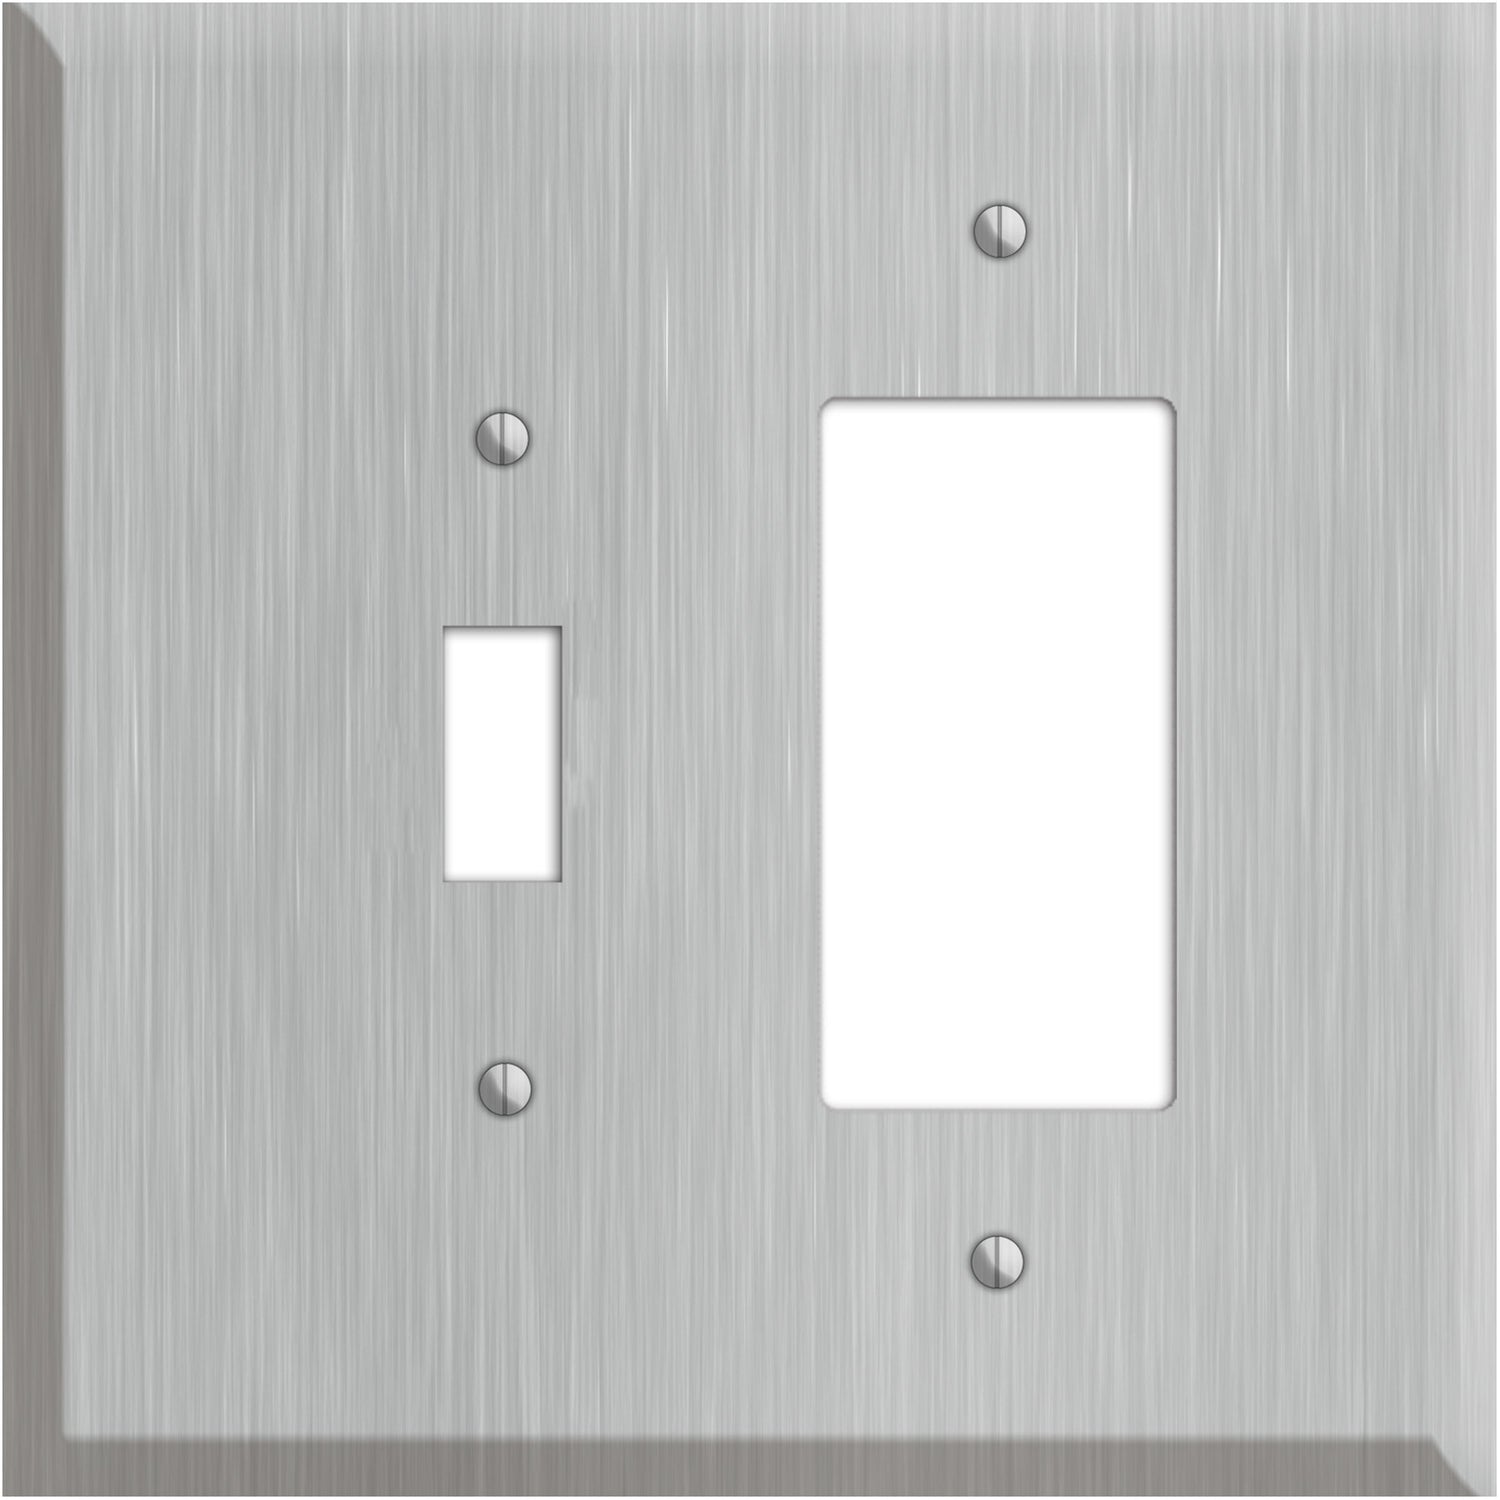 Oversized Discontinued Stainless Steel Toggle / Rocker Wallplate